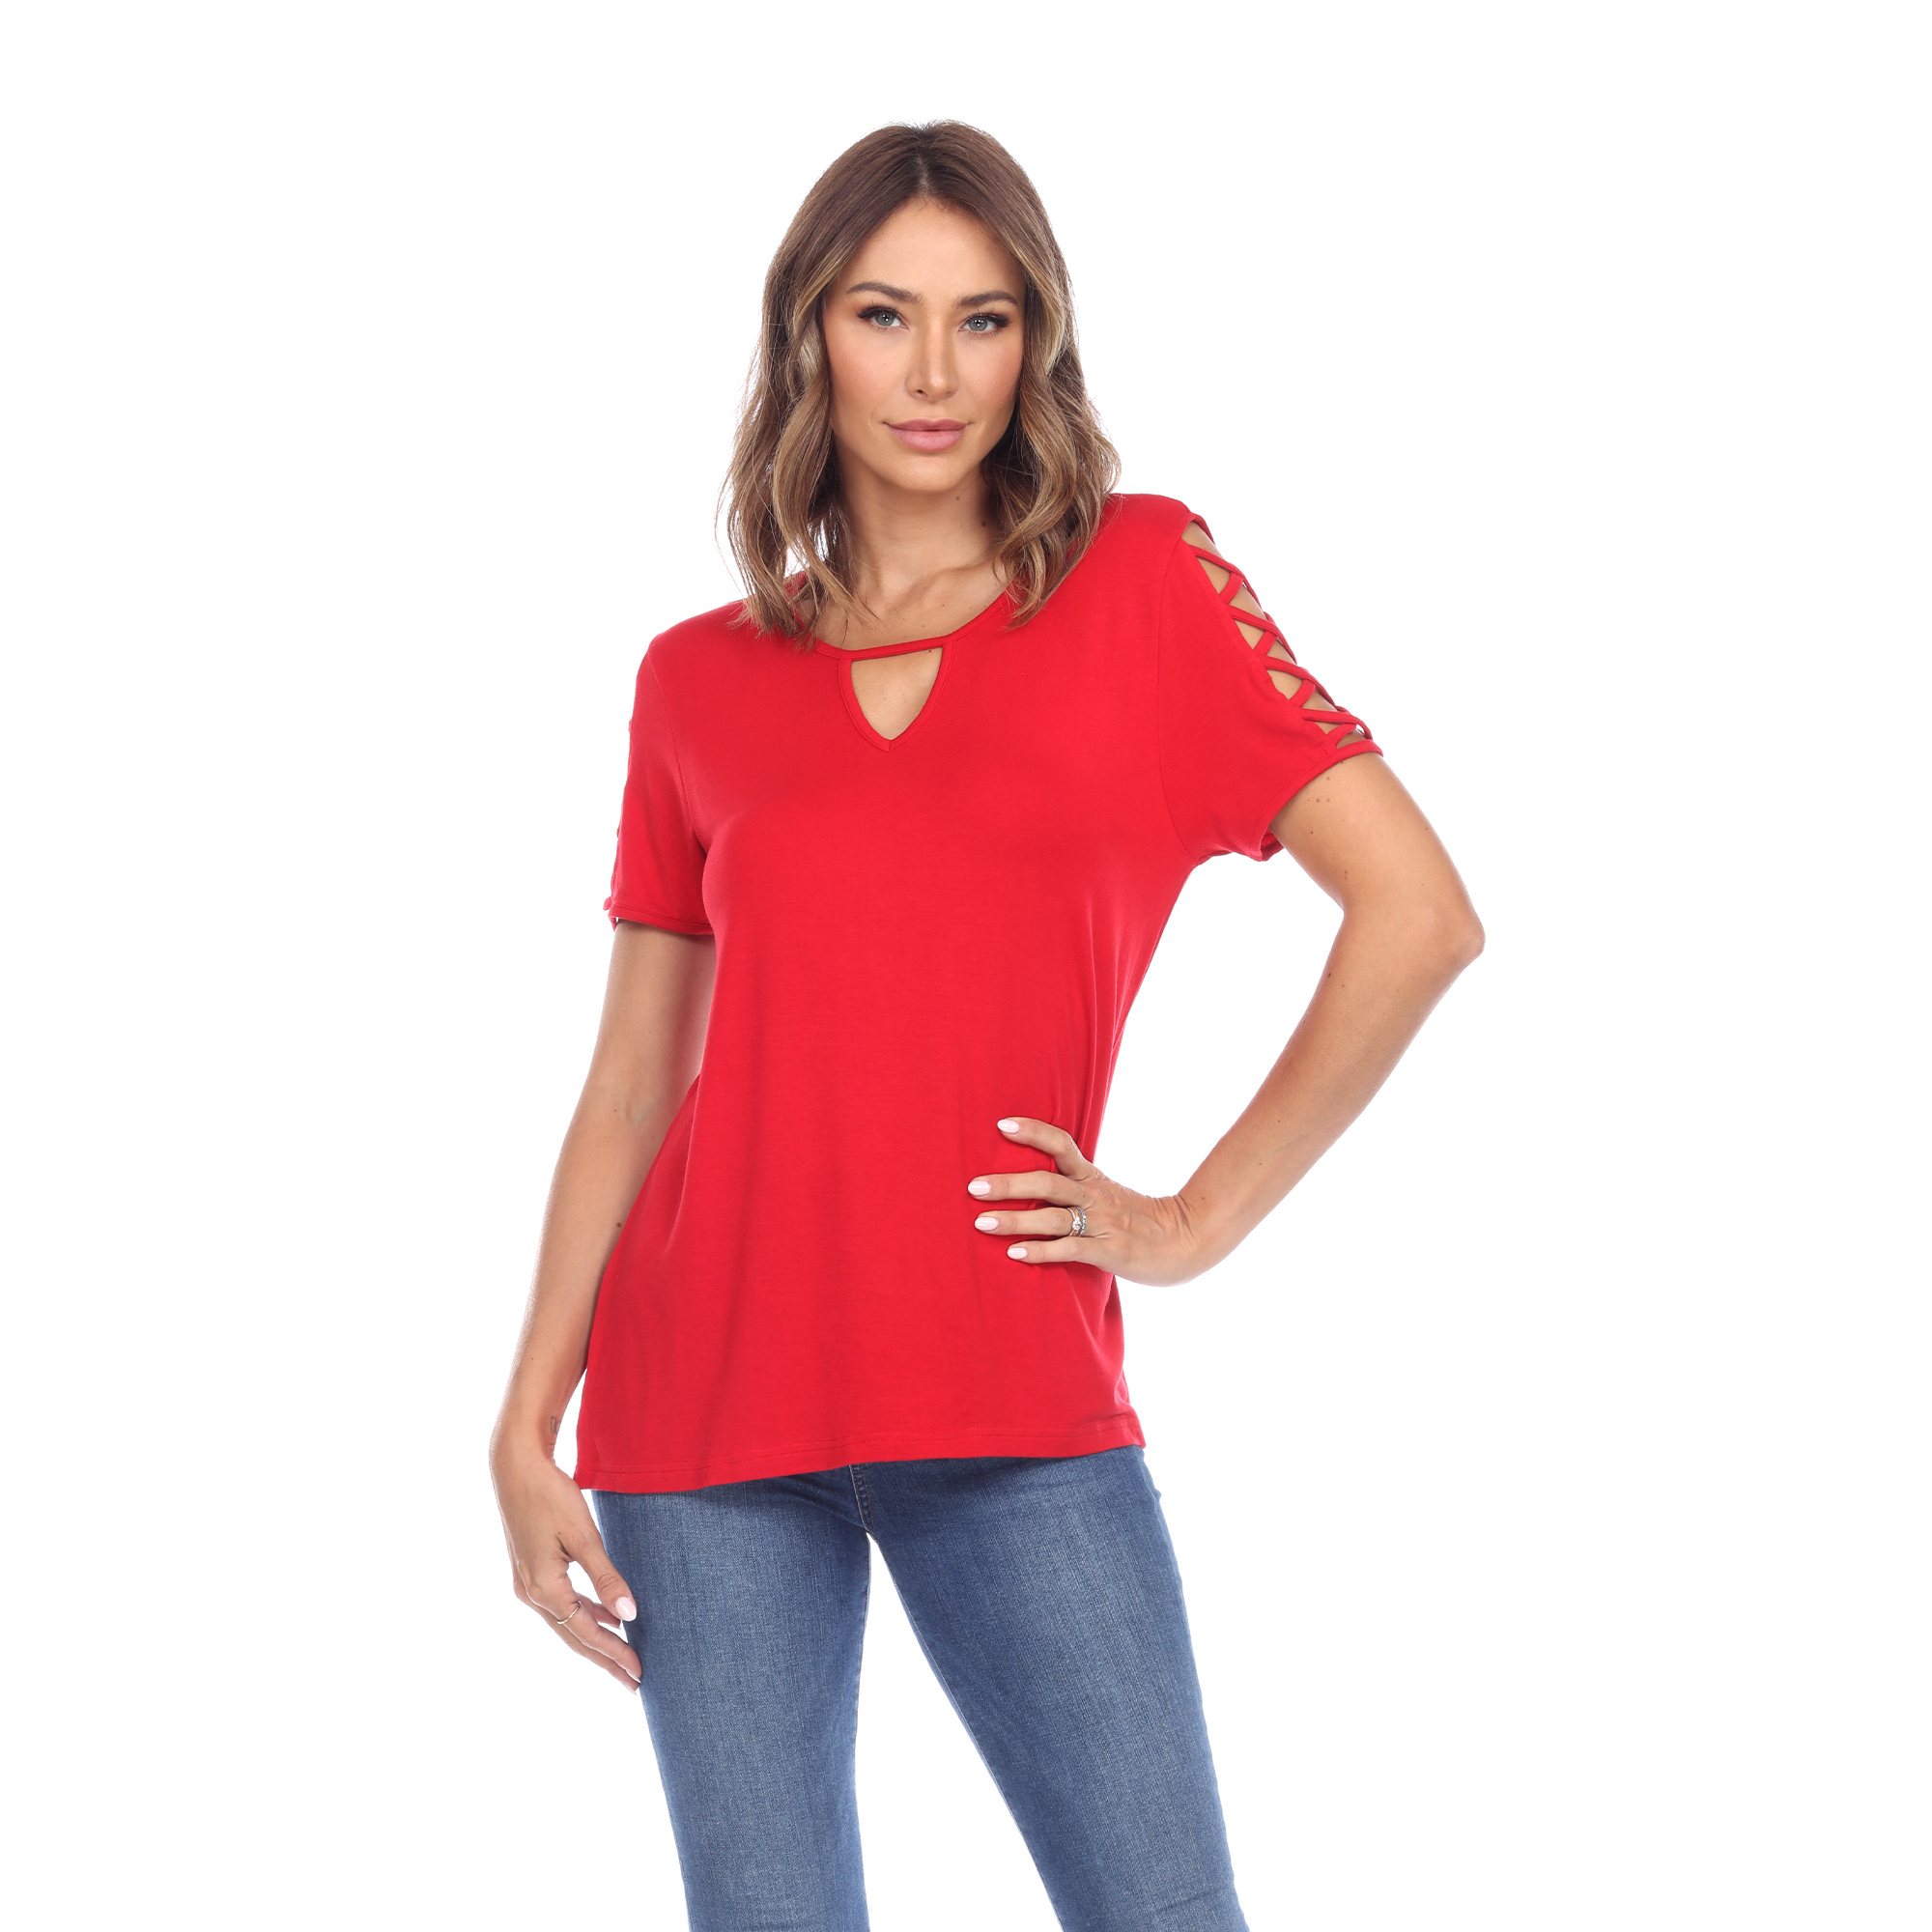 White Mark Women's Keyhole Neck Cutout Short Sleeve Top - Red, 2X